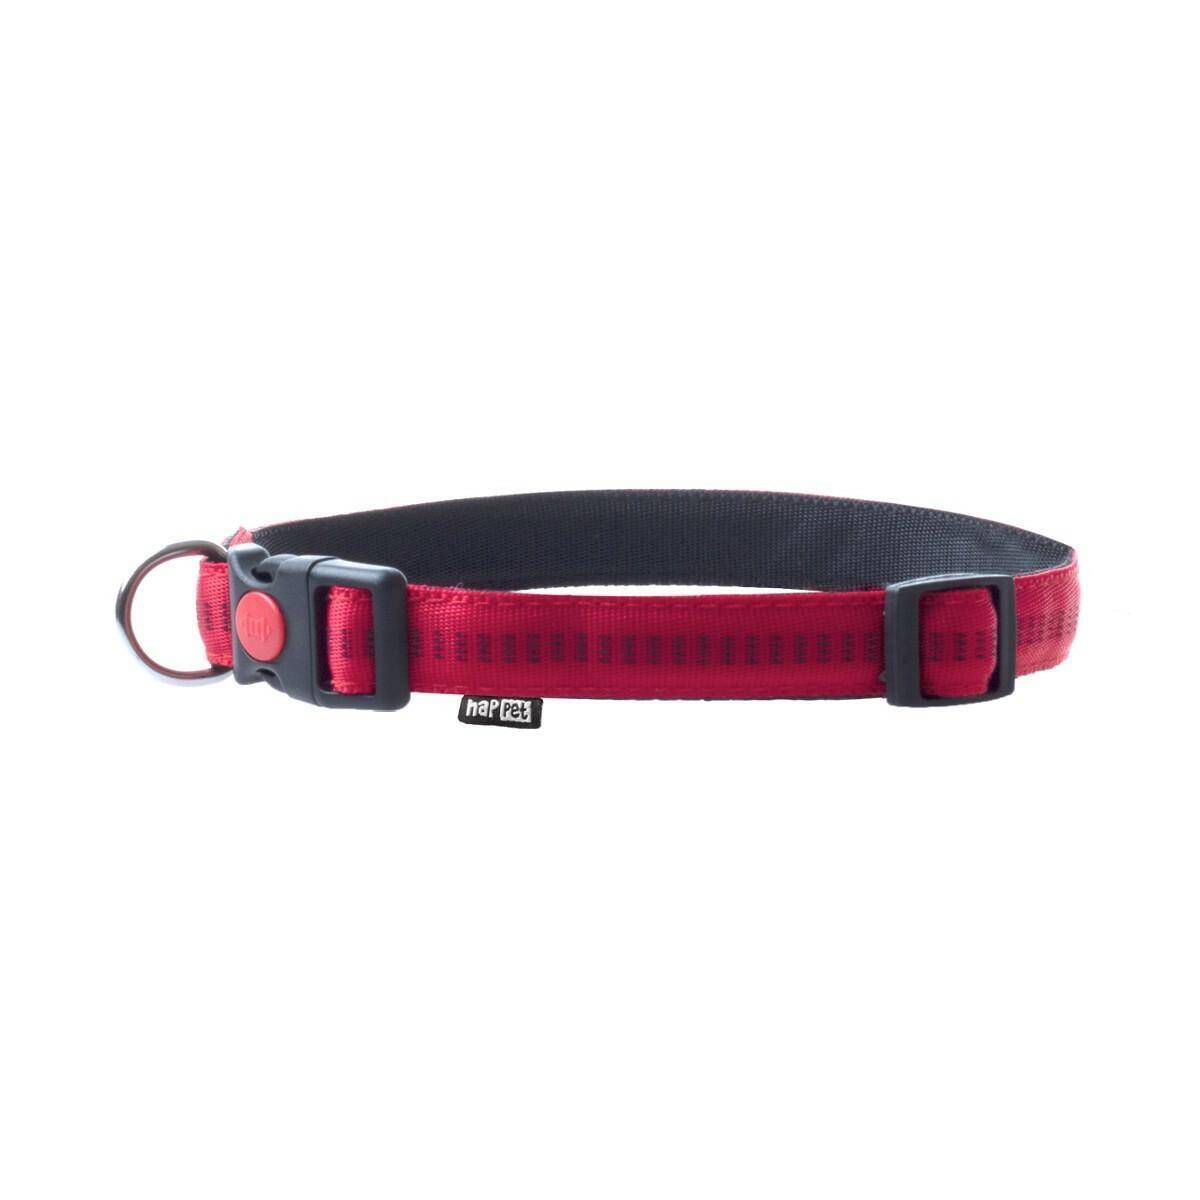 Collar S / Soft Style / Red - Happet JC21